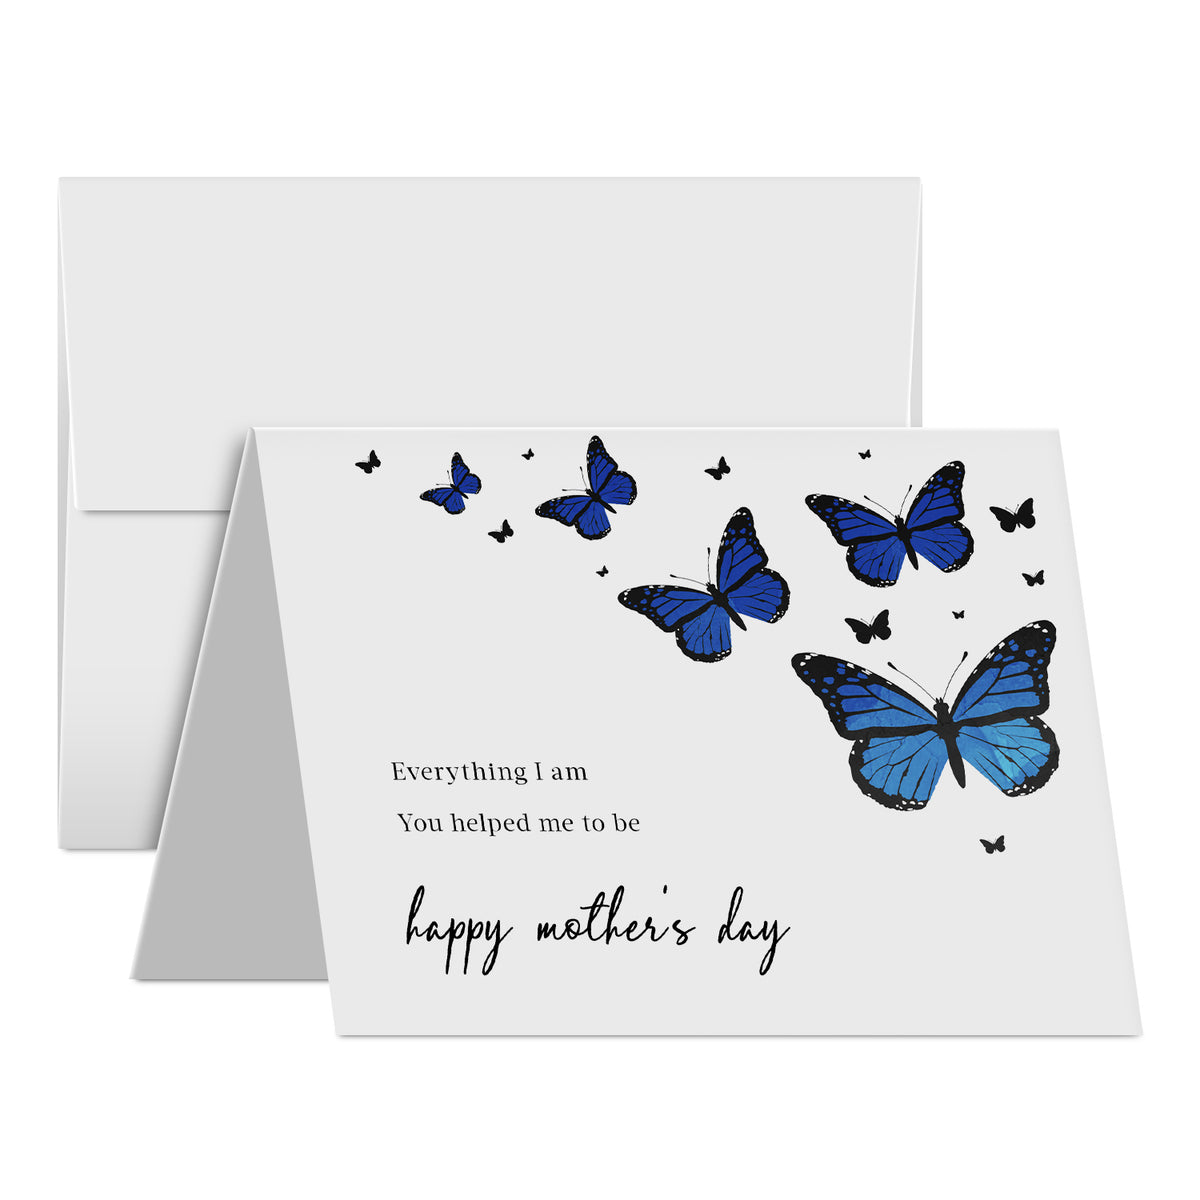 Everything I Am, You Helped Me to Be – Happy Mother's Day Greeting Cards and Envelopes for Mom, Wife | 4.25 x 5.5" | 10 per Pack